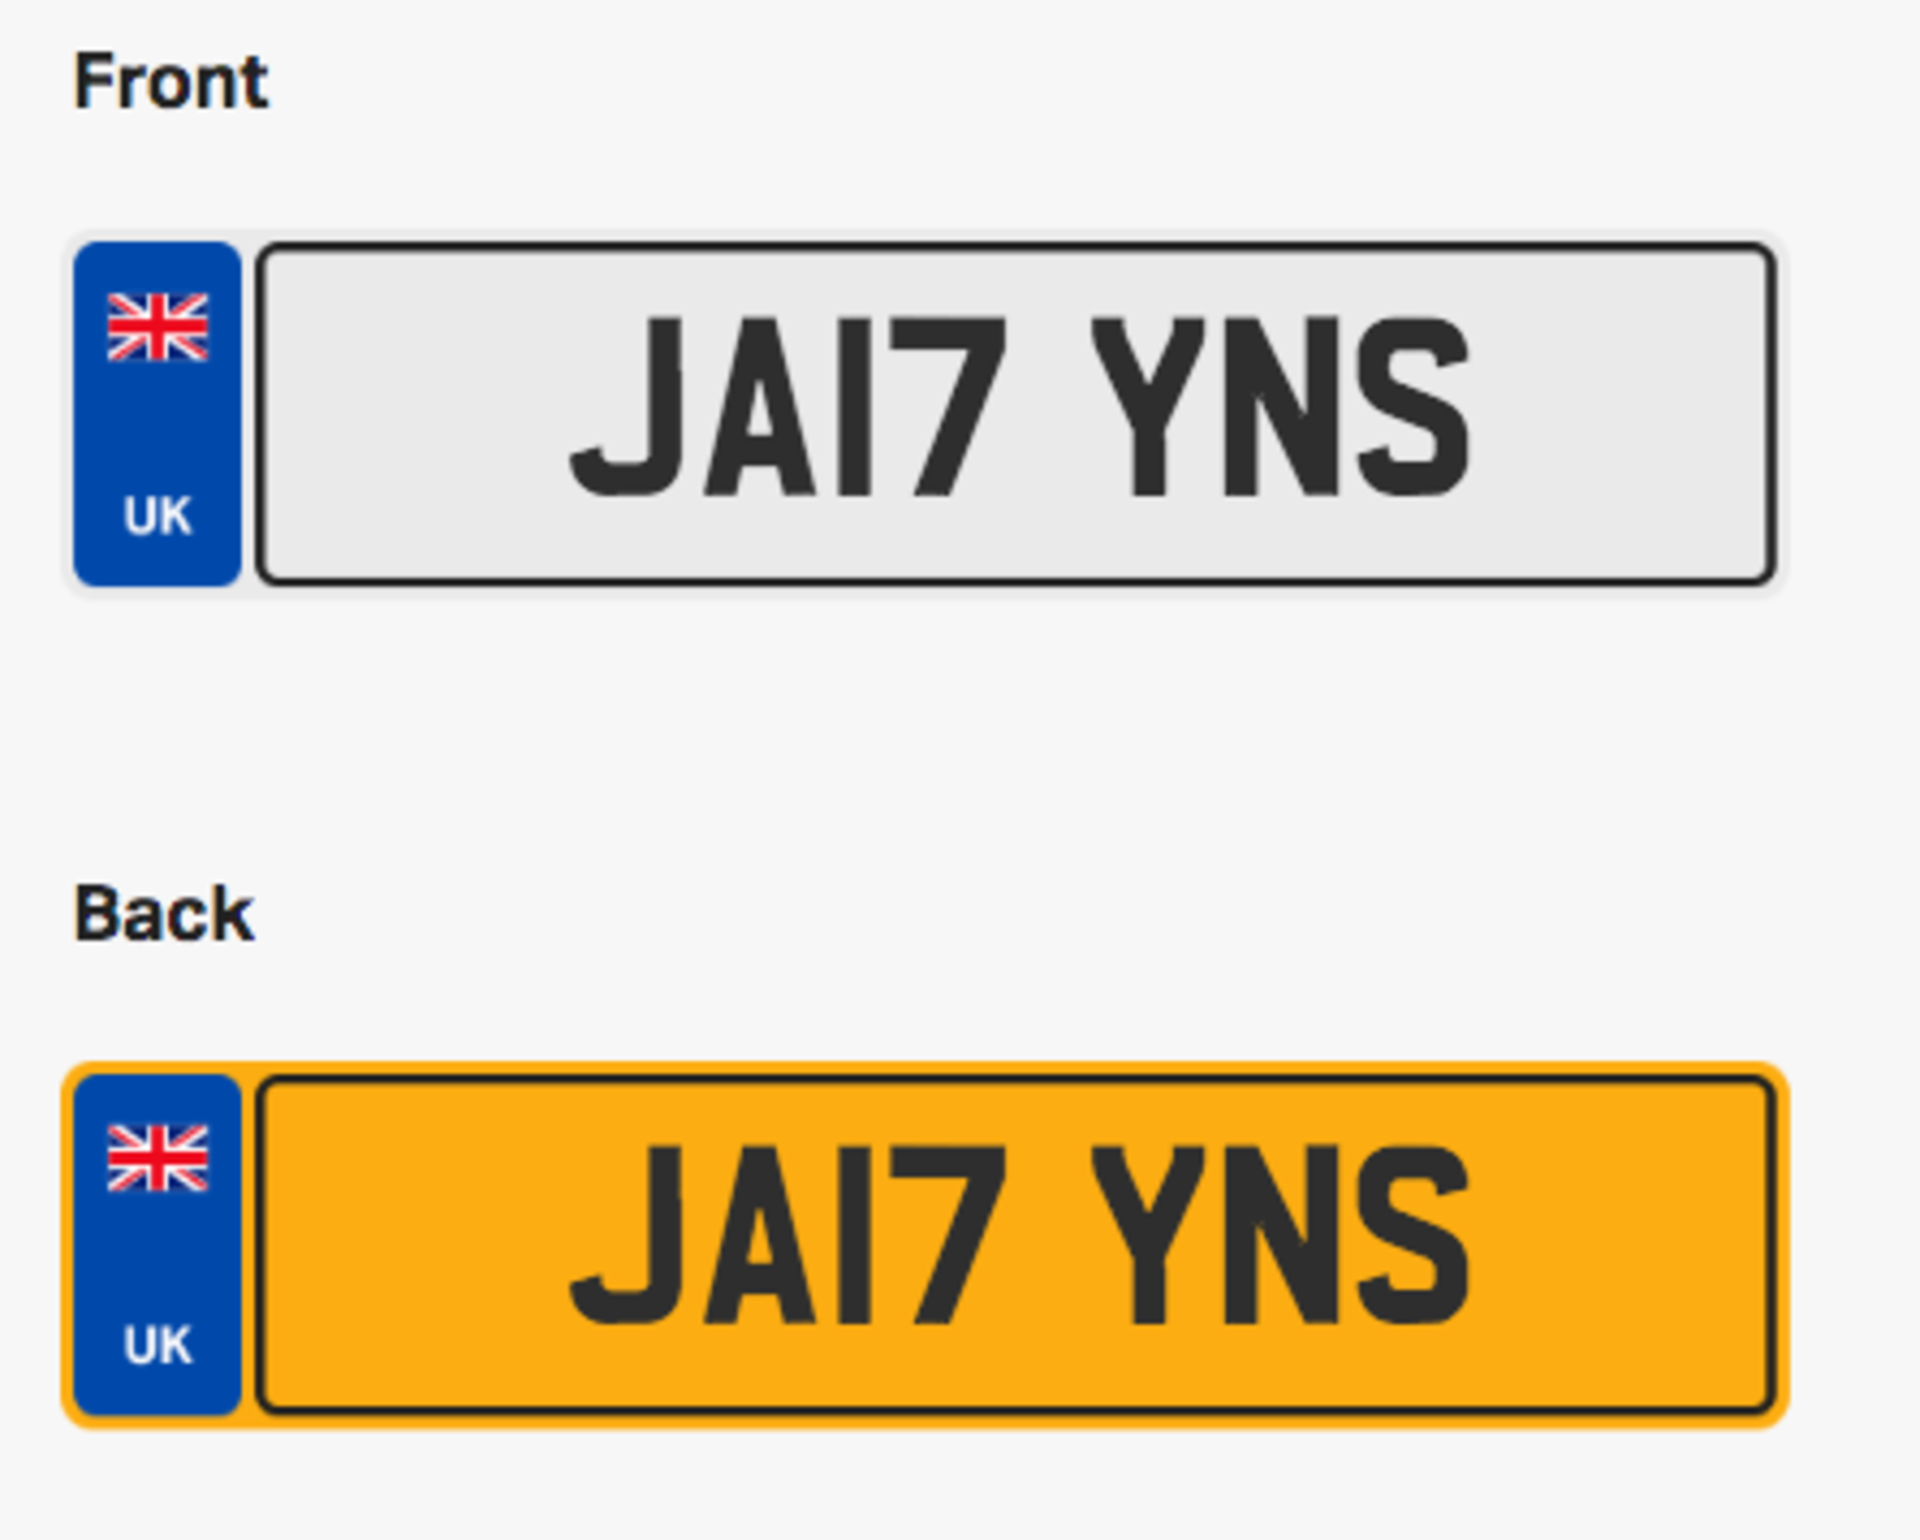 JA17YNS. Private vehicle registration number plate, ready to transfer to new owner